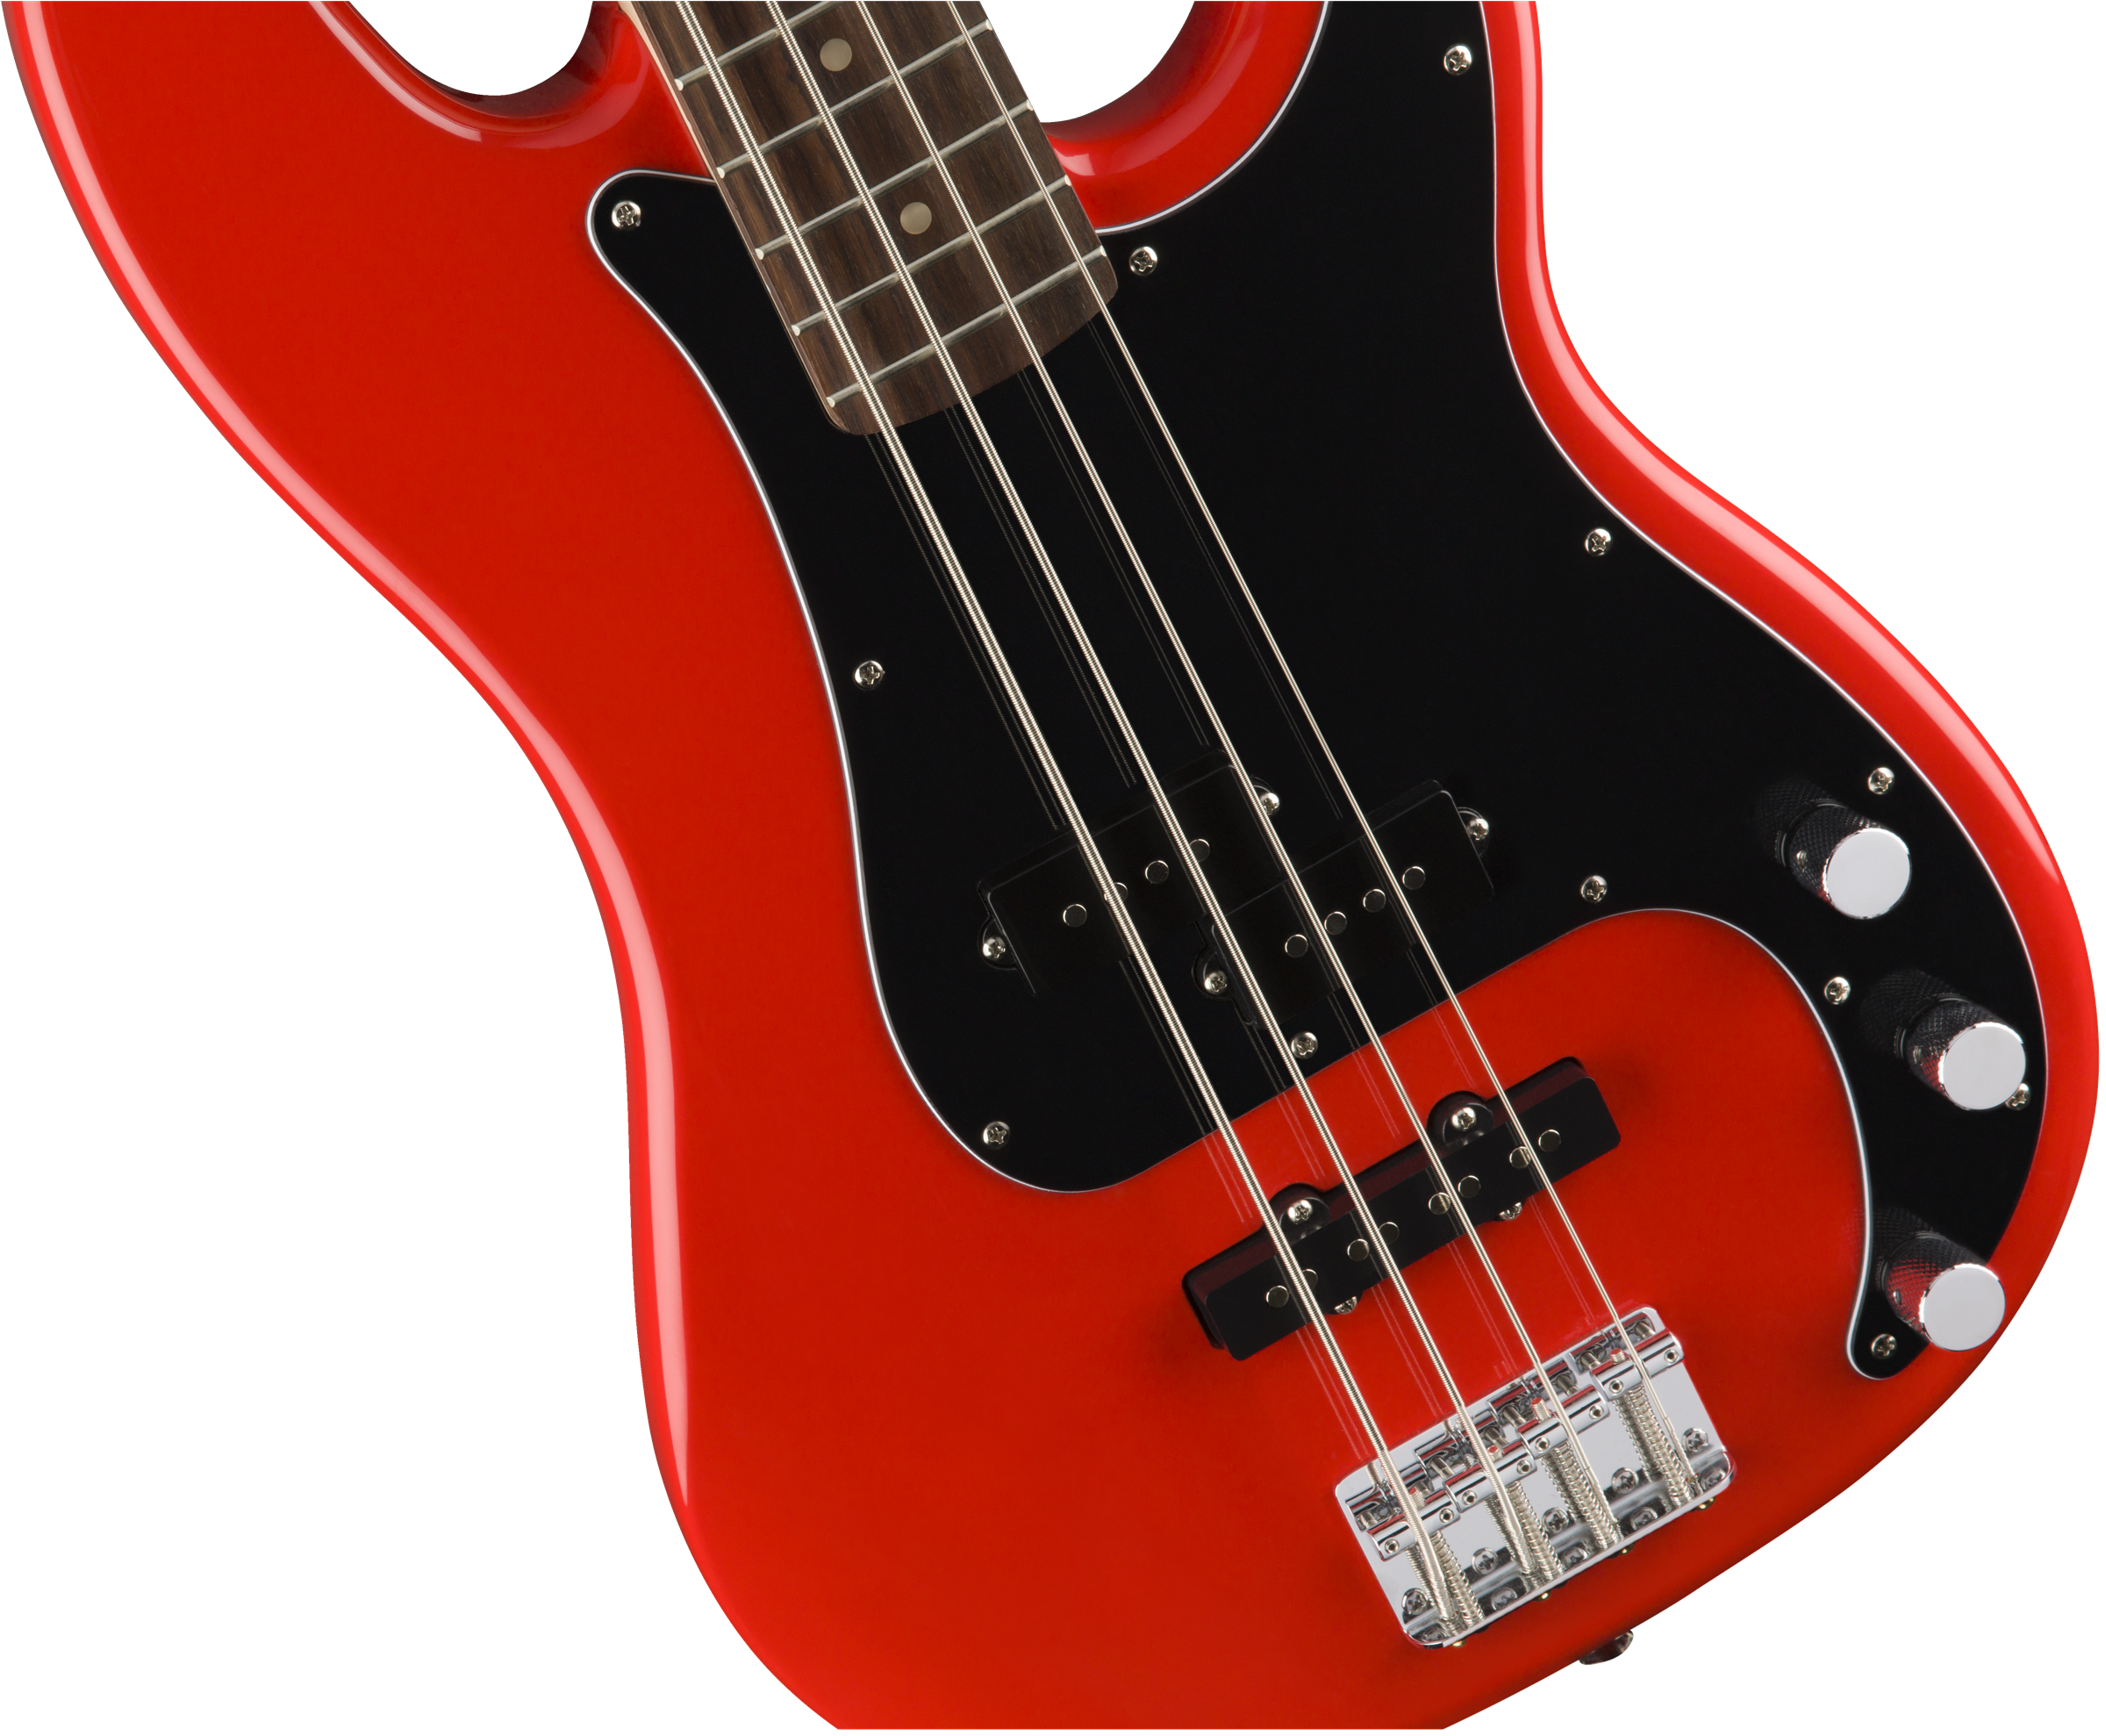 Squier Precision Bass Affinity Series Pj (lau) - Race Red - Solidbody E-bass - Variation 3